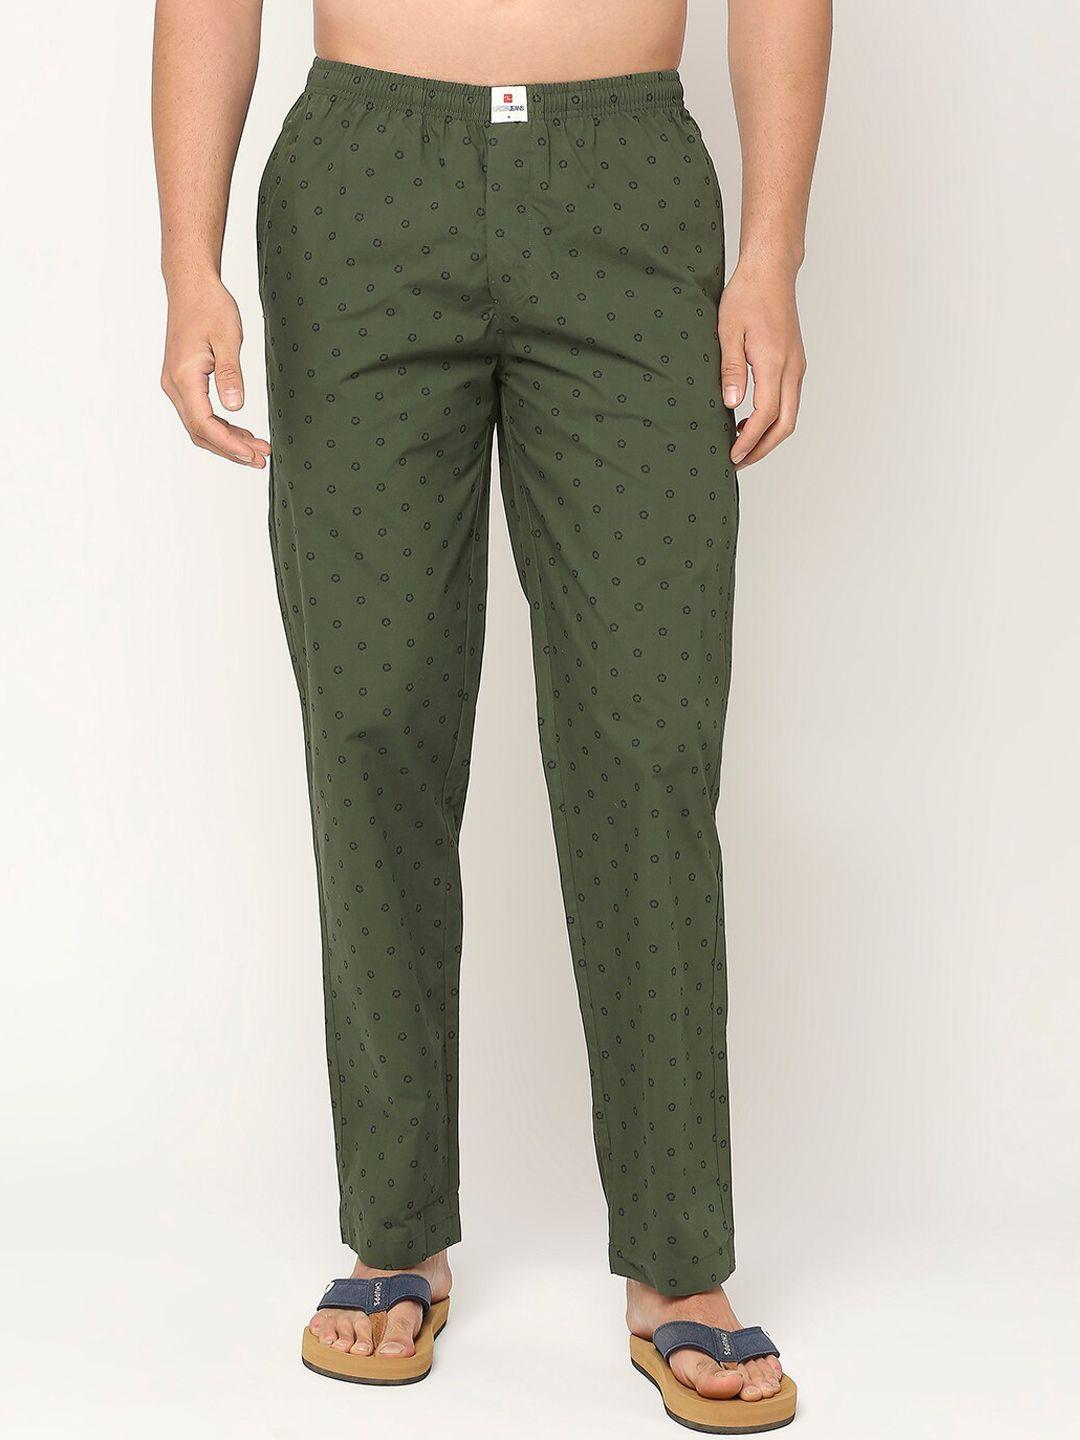 underjeans-by-spykar-men-printed-cotton-mid-rise-straight-lounge-pants